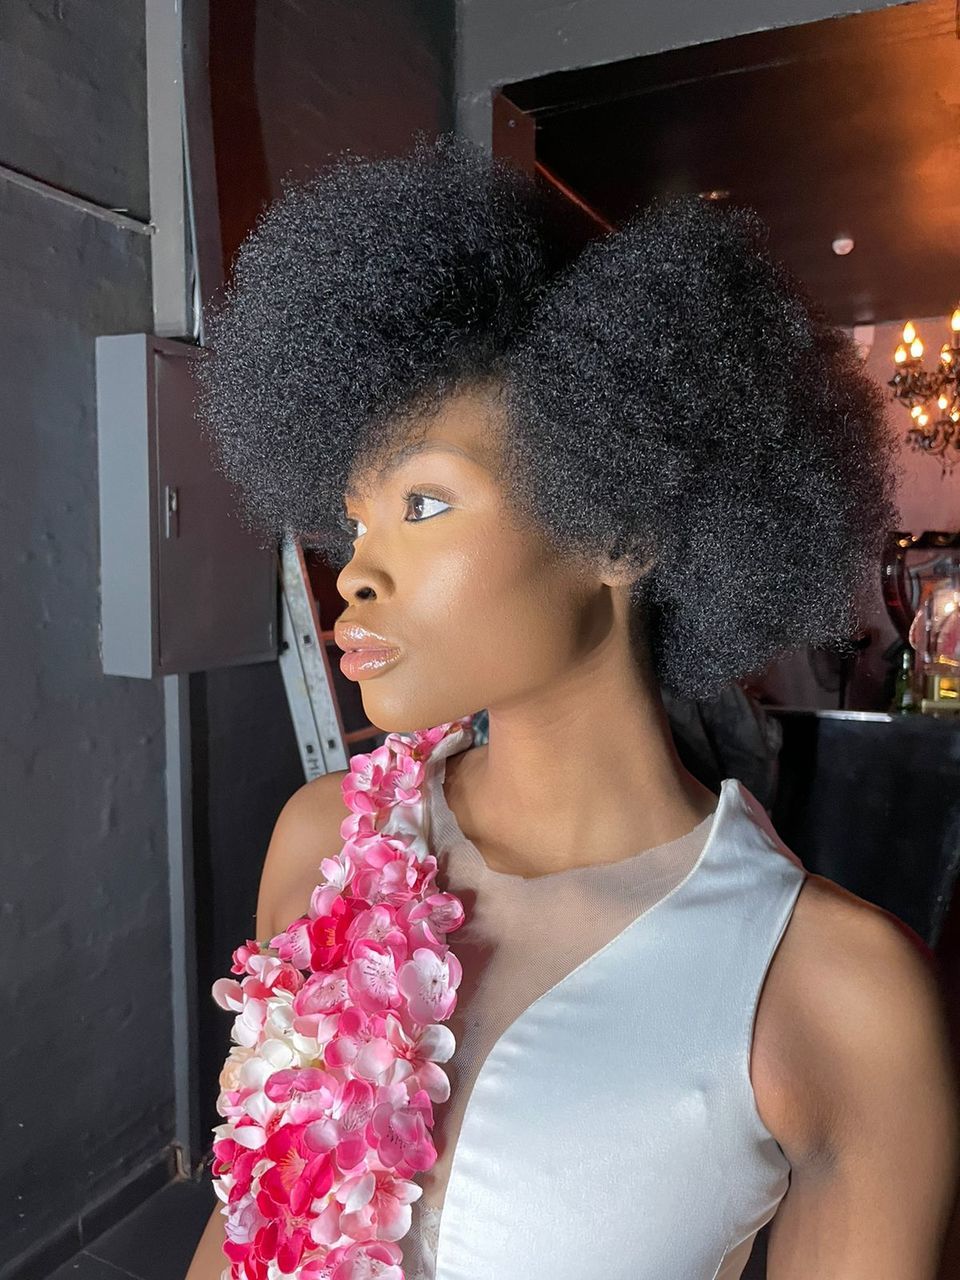 one person, hairstyle, afro, women, curly hair, adult, human hair, portrait, young adult, fashion, clothing, arts culture and entertainment, lifestyles, indoors, waist up, pink, black hair, dress, looking, flower, headshot, emotion, standing, female, looking away, leisure activity, person, smiling, happiness, glamour